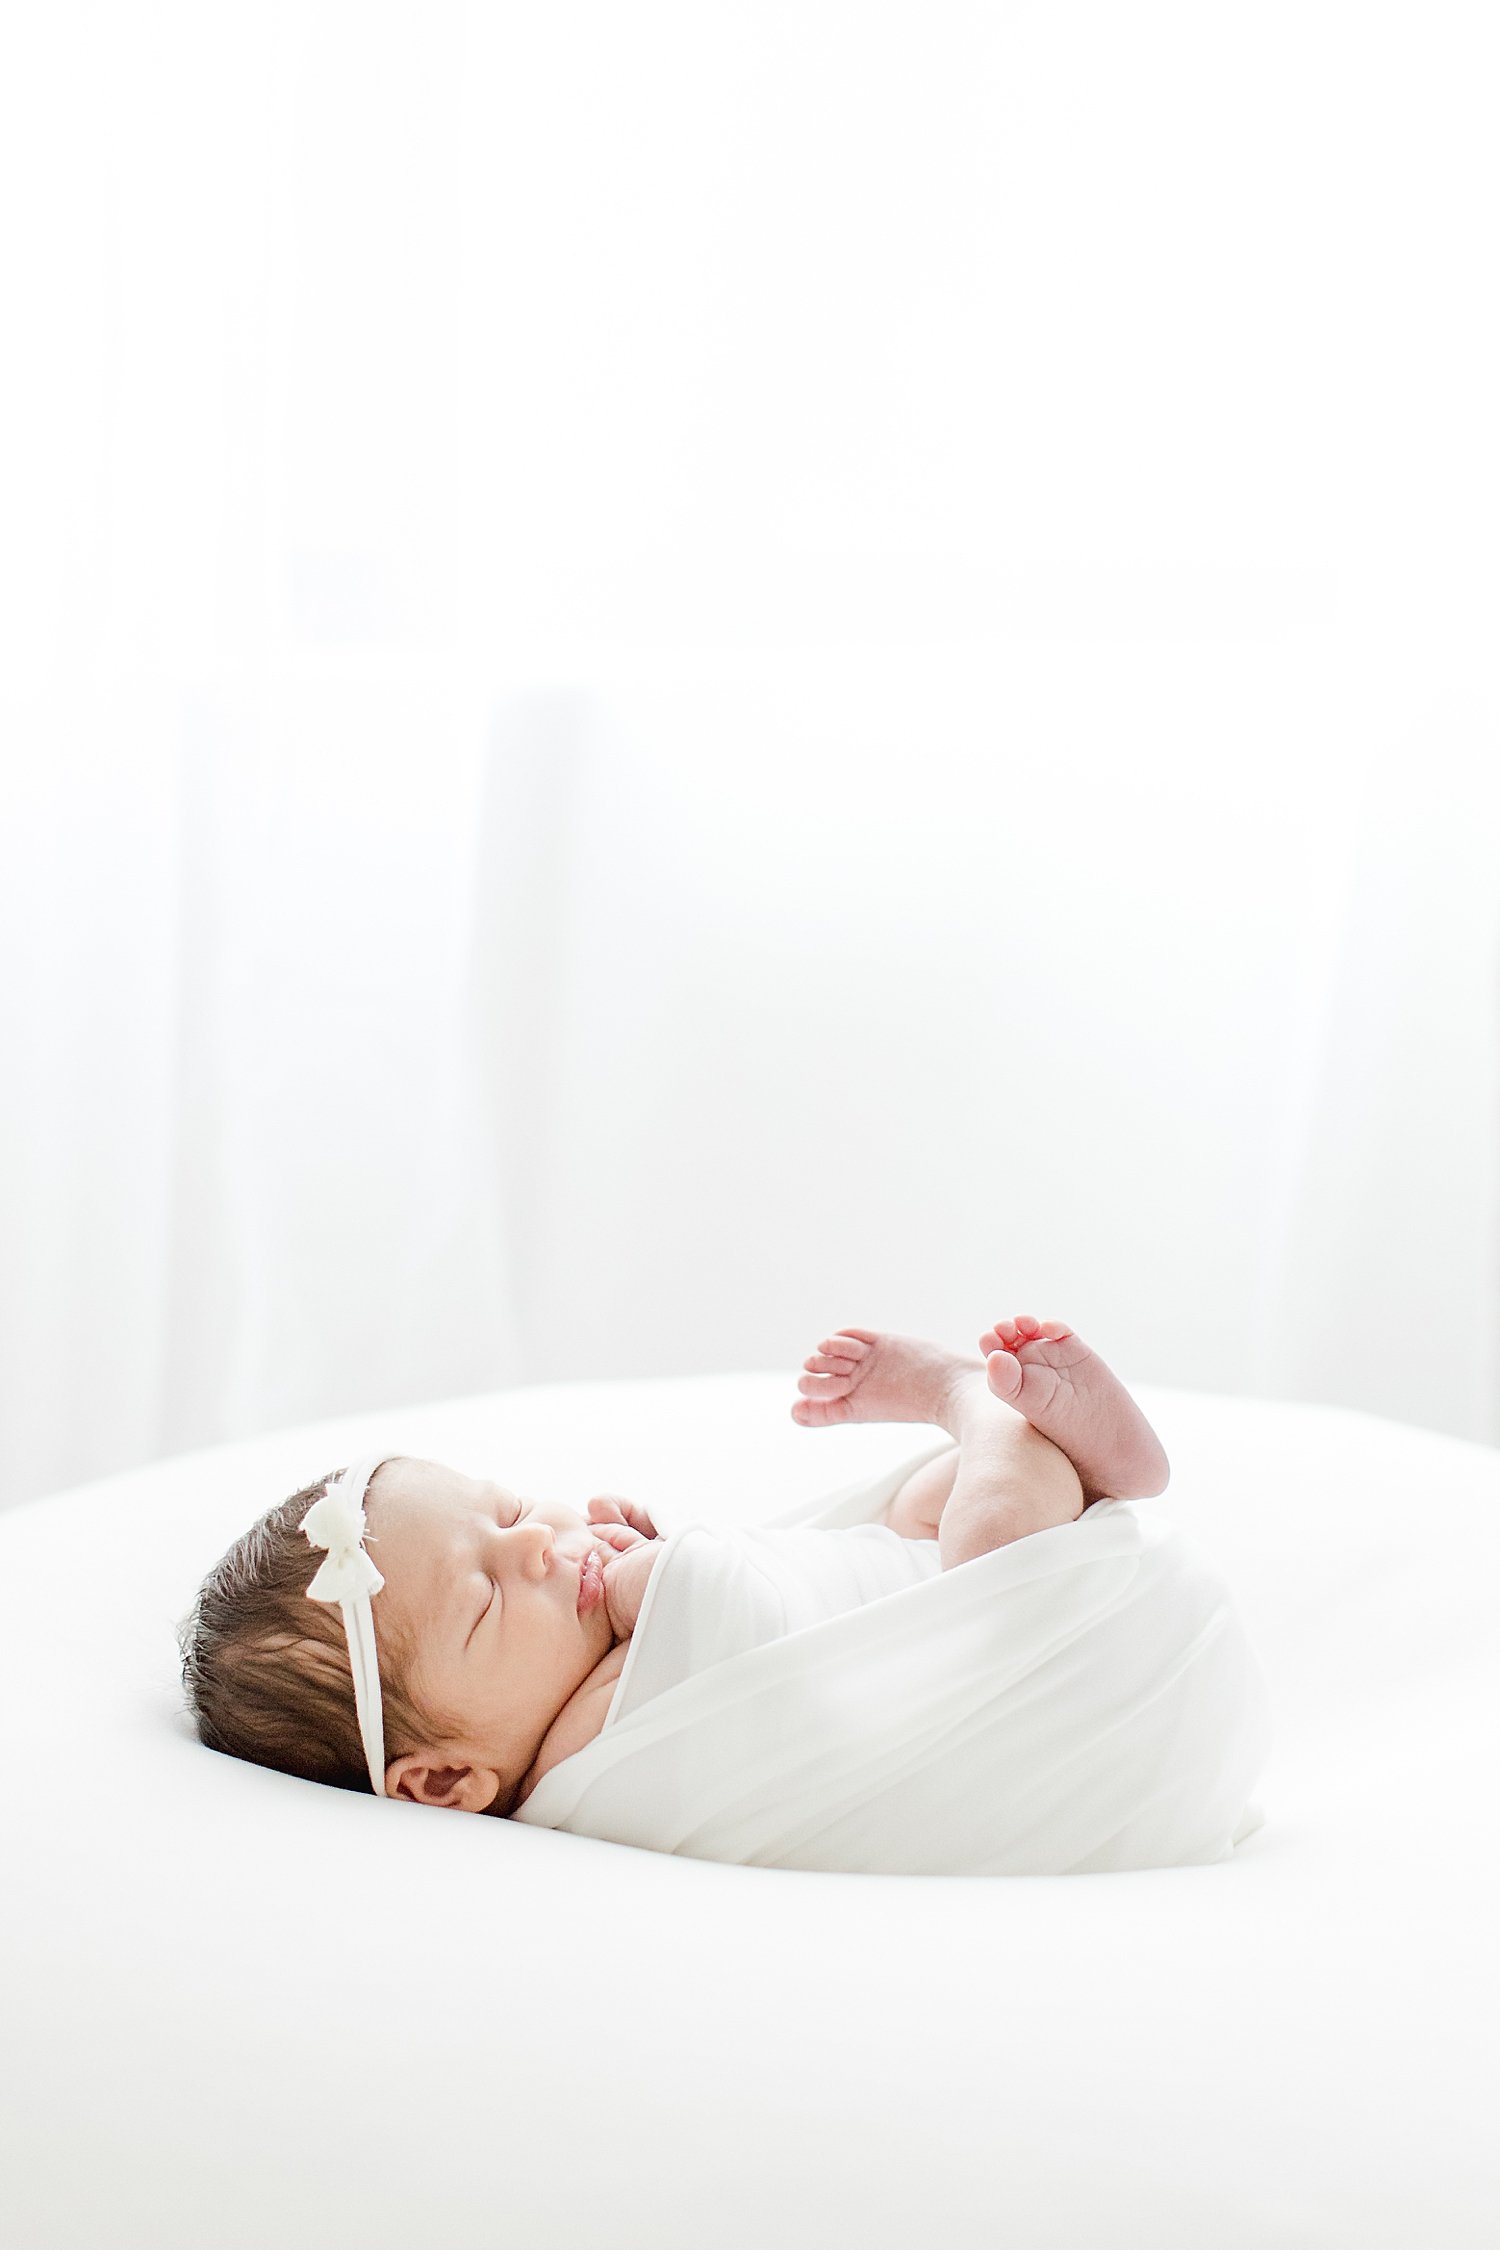 Baby girl swaddled in white for newborn photos with Kristin Wood Photography.